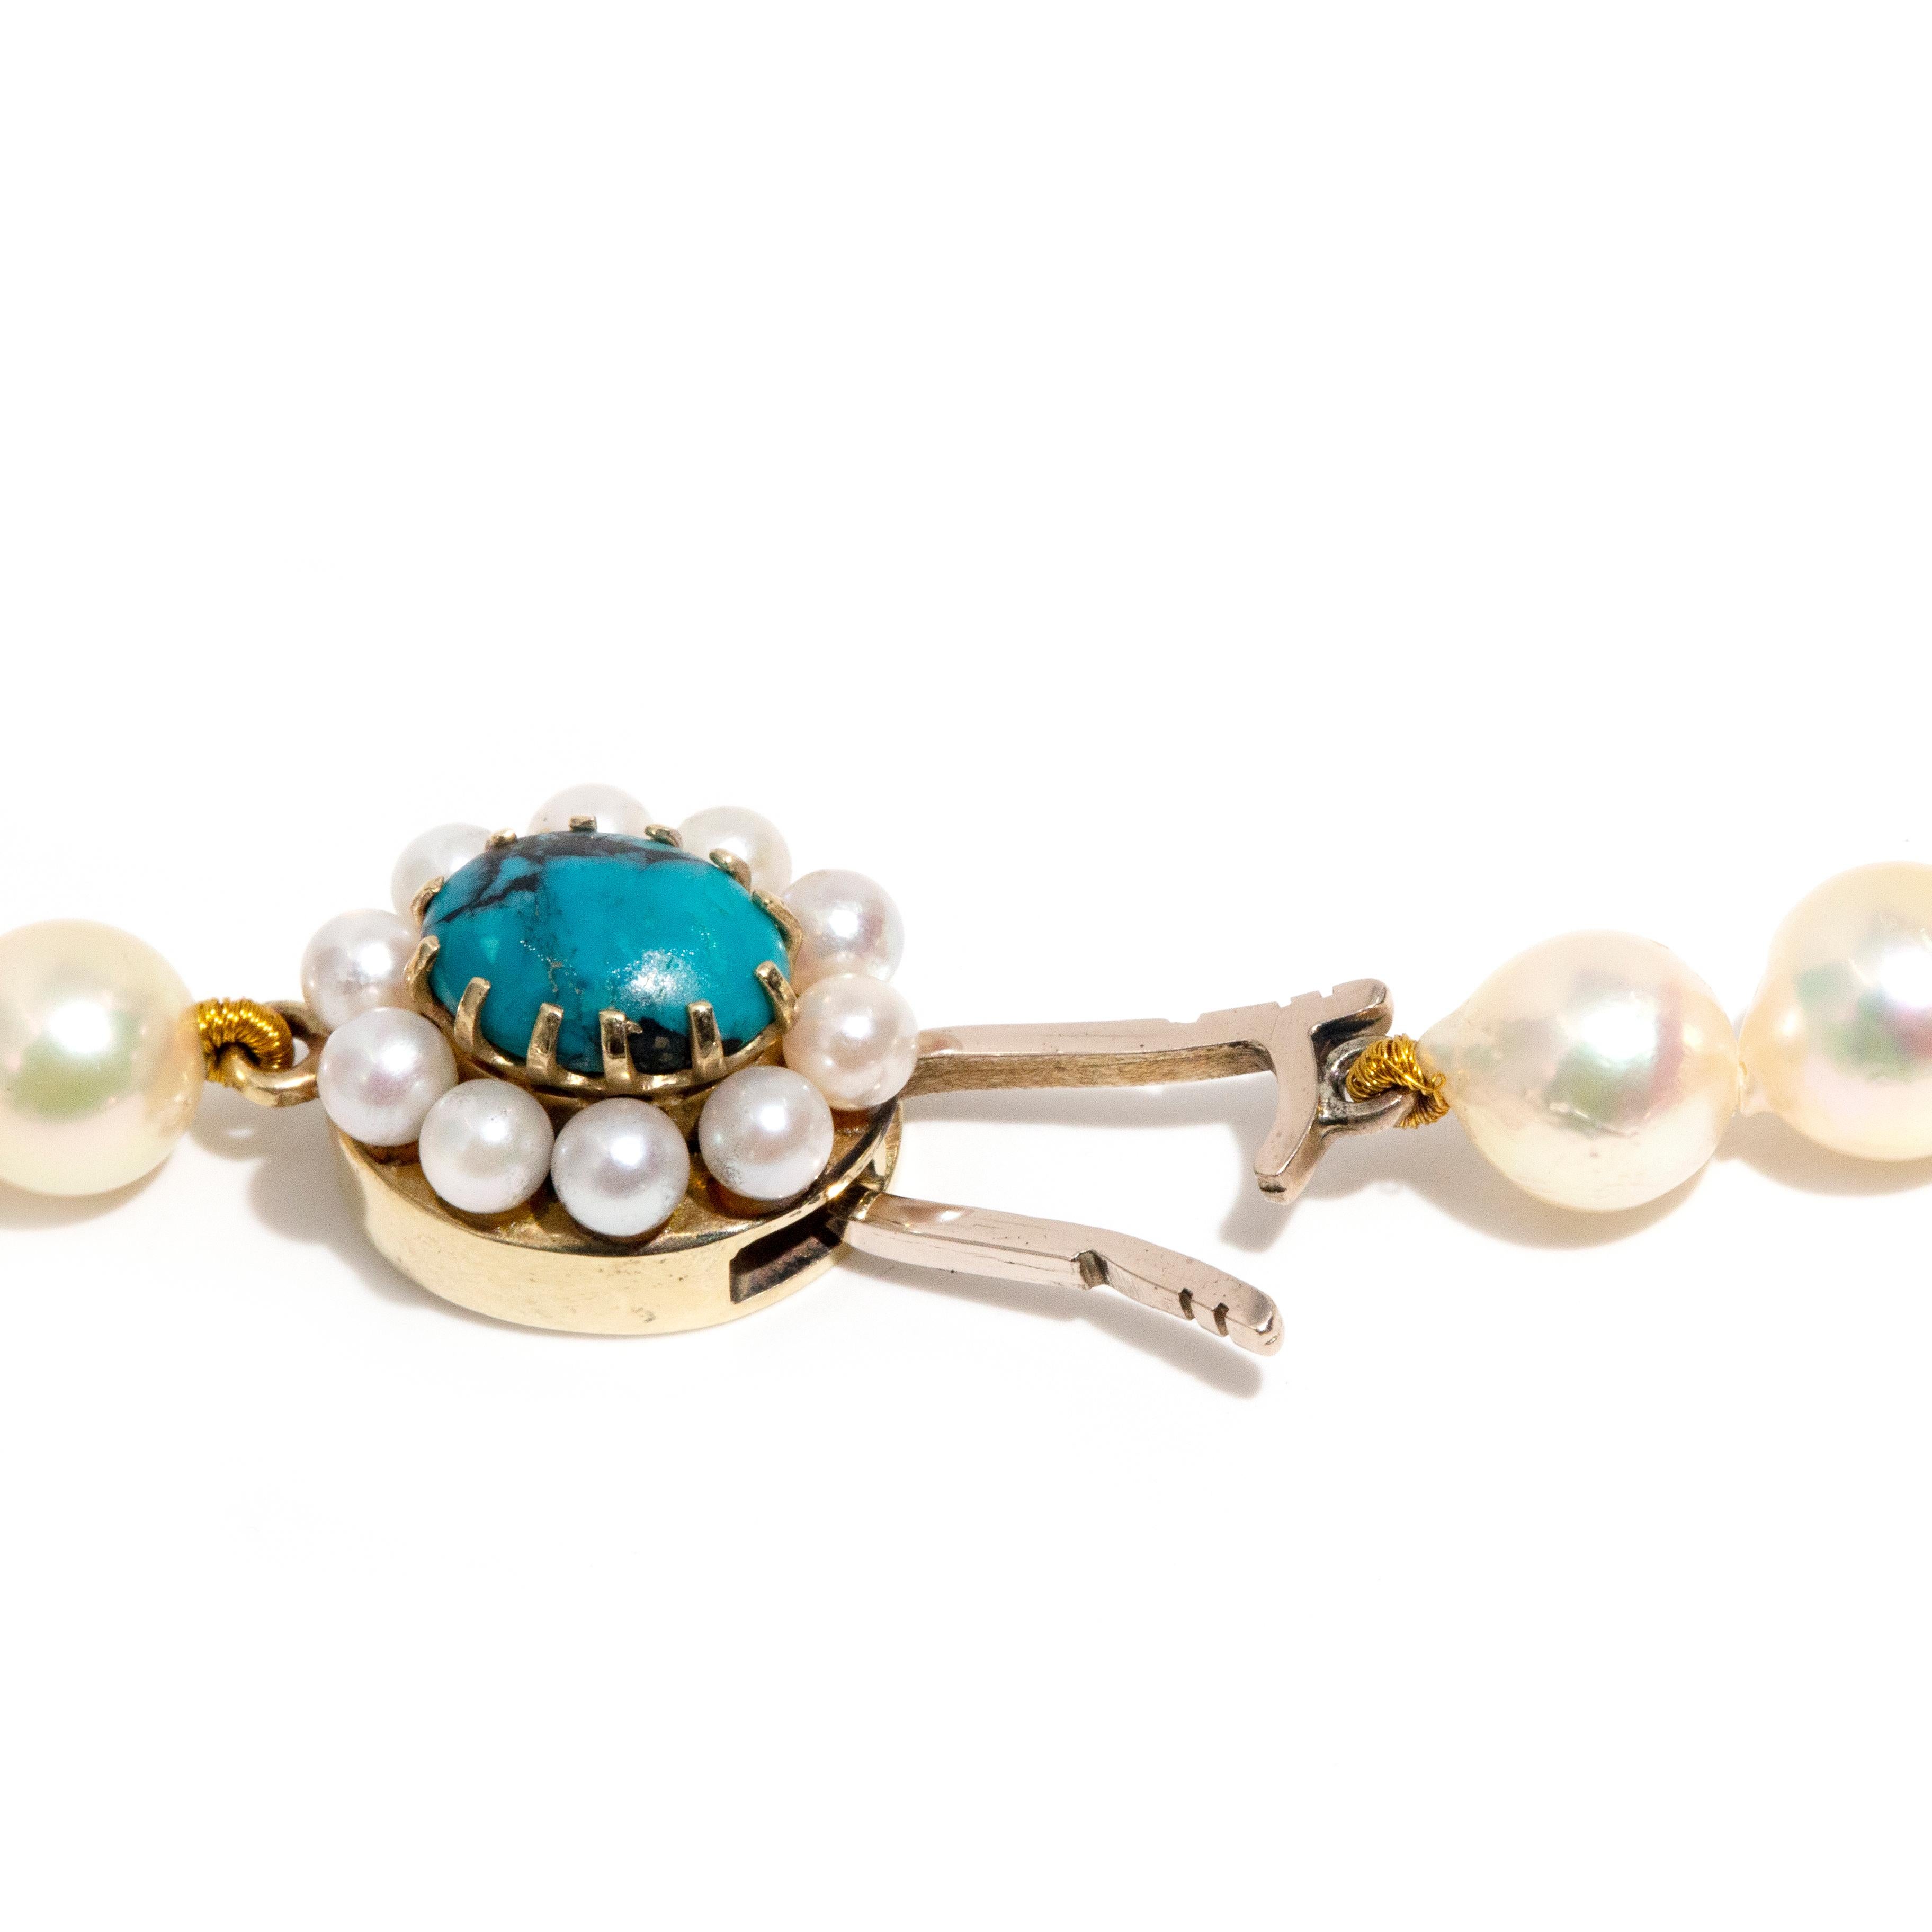 Women's Vintage 1980s Cultured Pearl Necklace & 9 Carat Gold Turquoise and Pearl Clasp